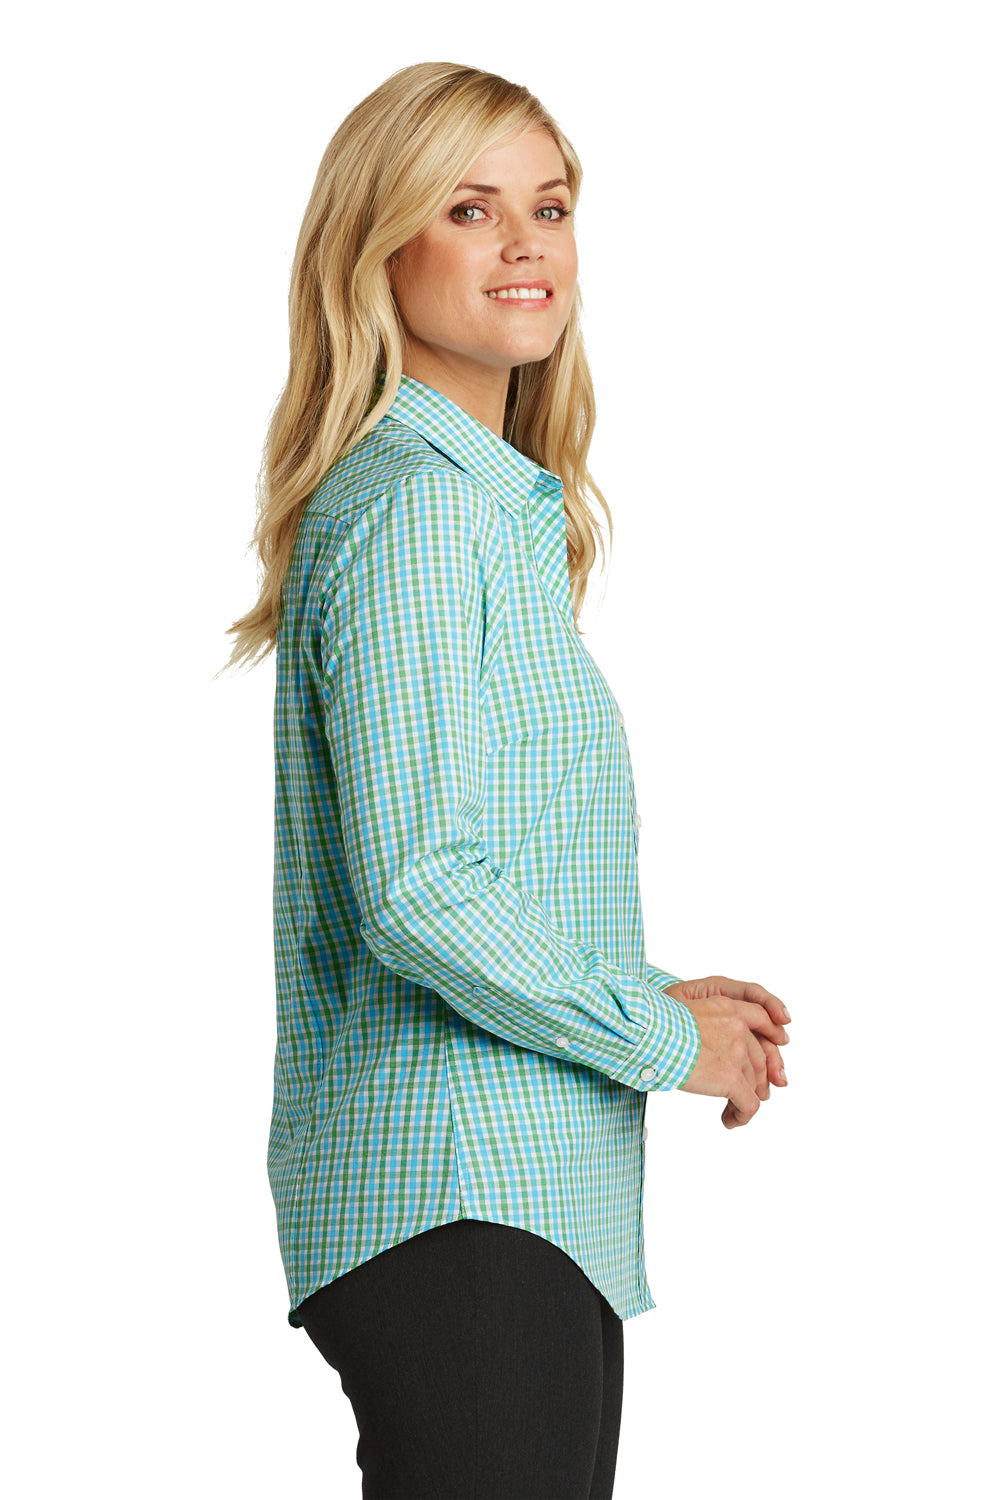 Port Authority L654 Womens Easy Care Wrinkle Resistant Long Sleeve Button Down Shirt Green/Aqua Blue Side